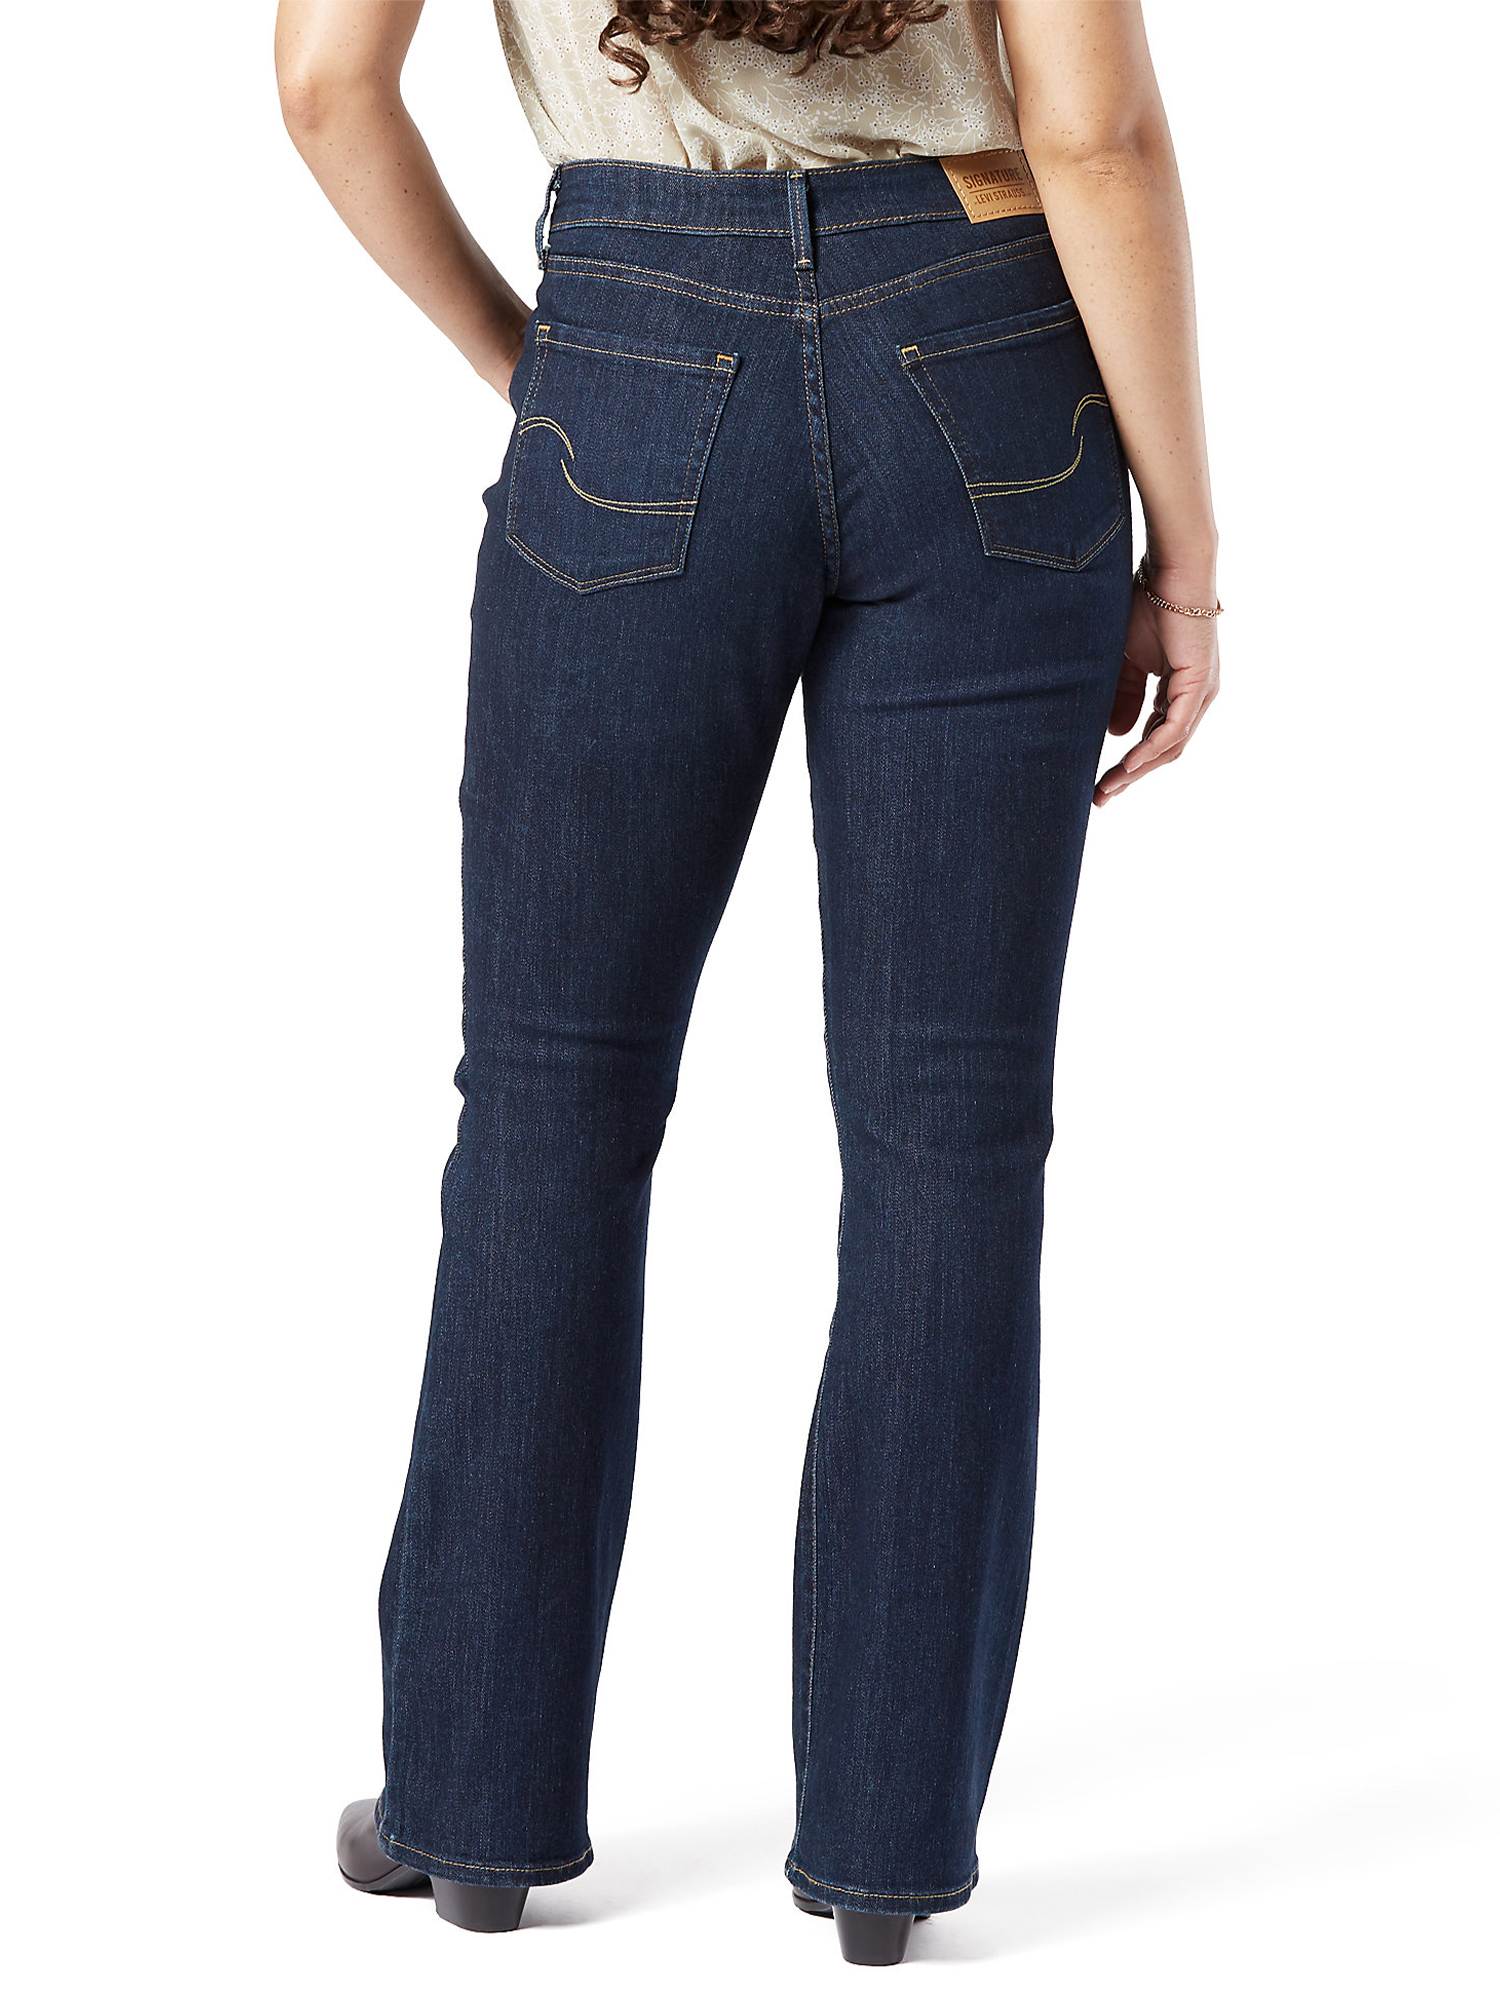 Signature by Levi Strauss & Co. Women's and Women's Plus Modern Bootcut Jeans - image 3 of 5